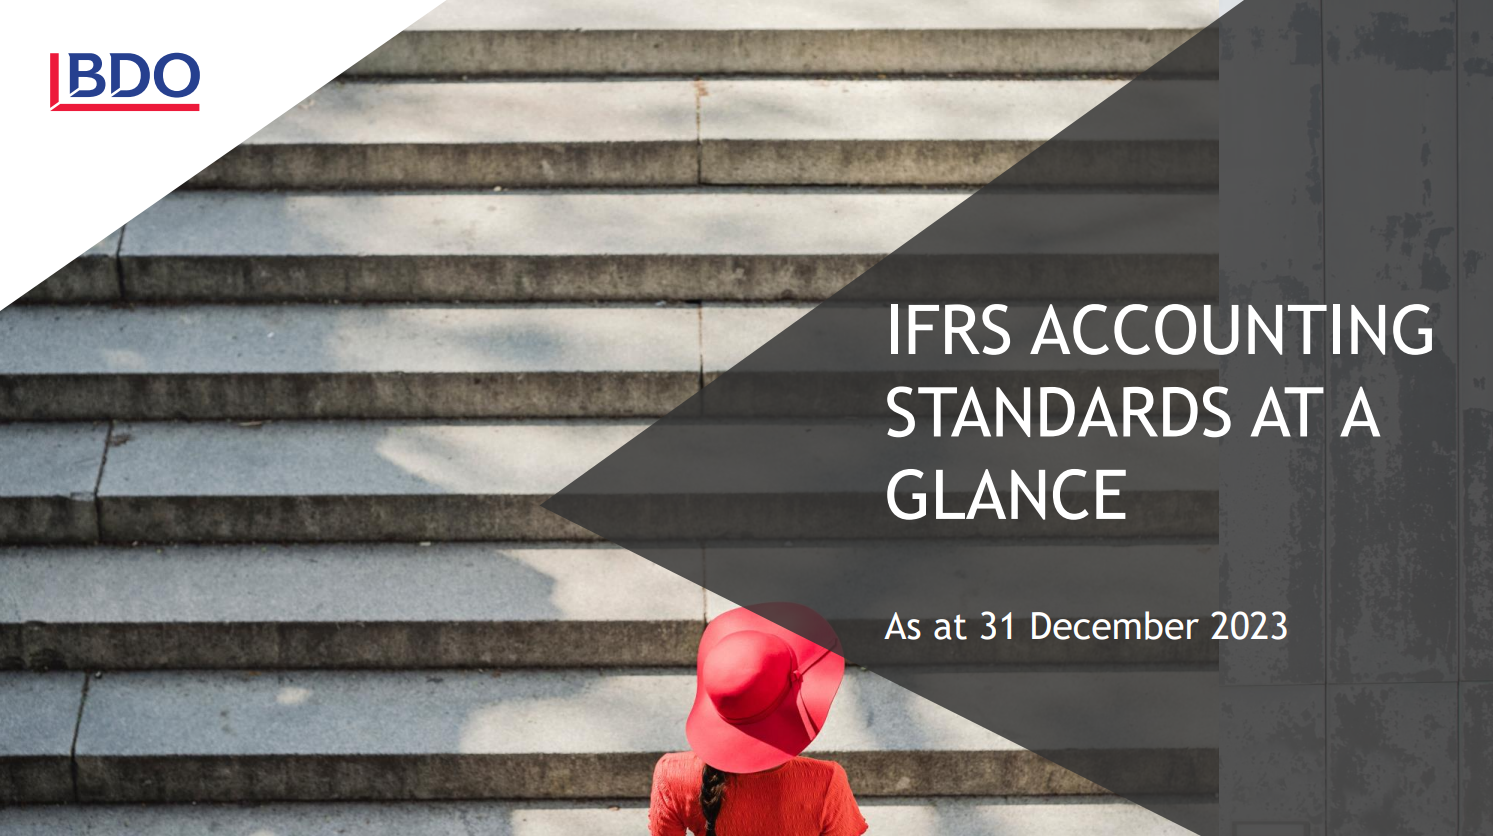 IFRS Accounting Standards At a Glance - 31 December 2023